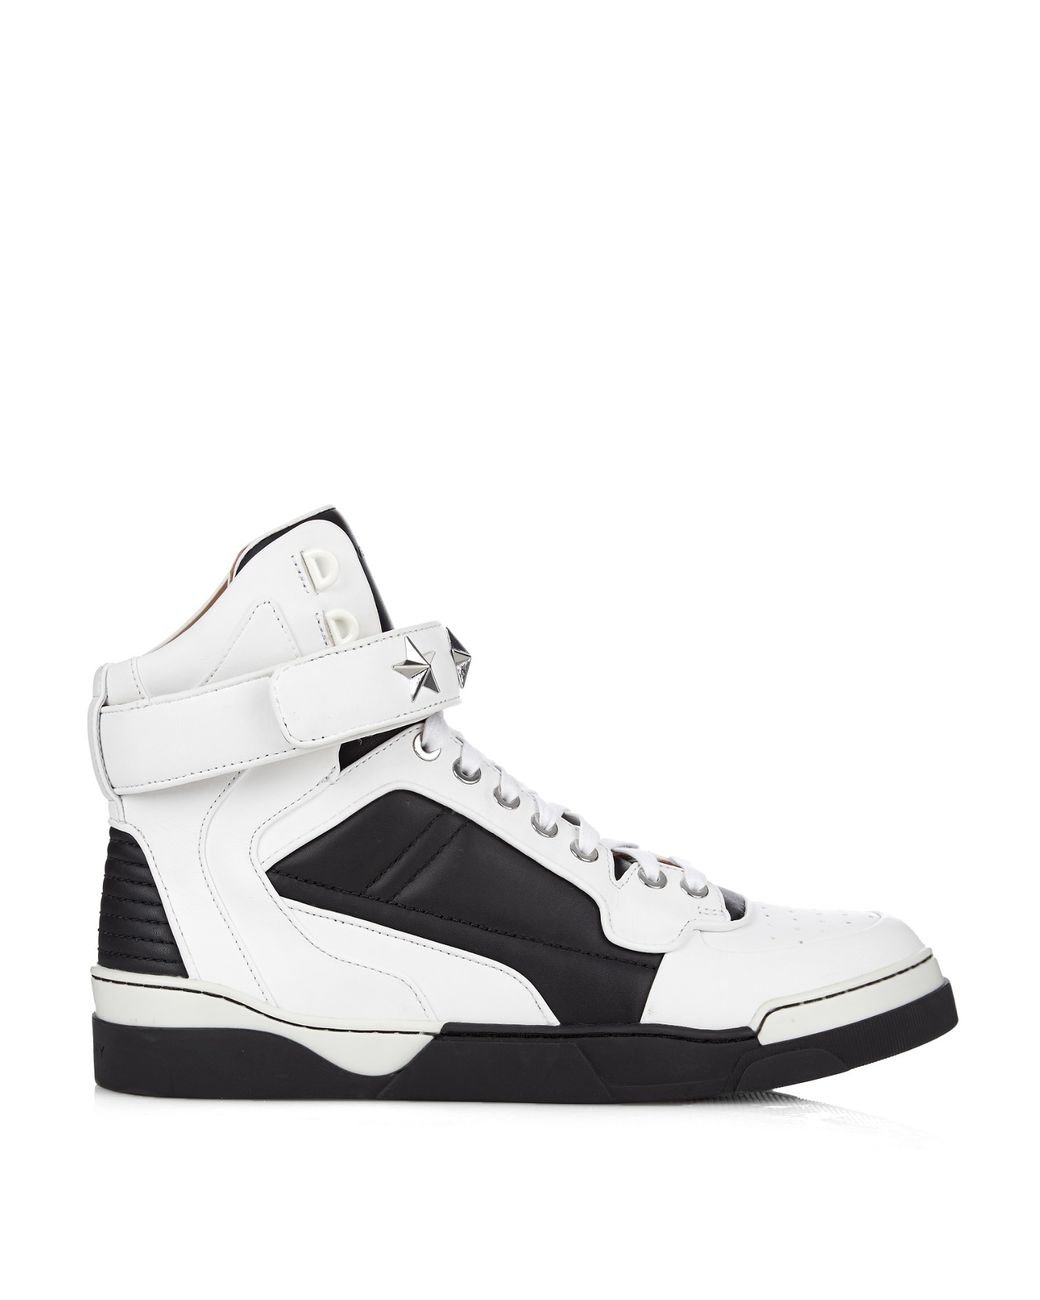 Givenchy Tyson Star-Studded Leather High-Top Sneakers in Black | Lyst